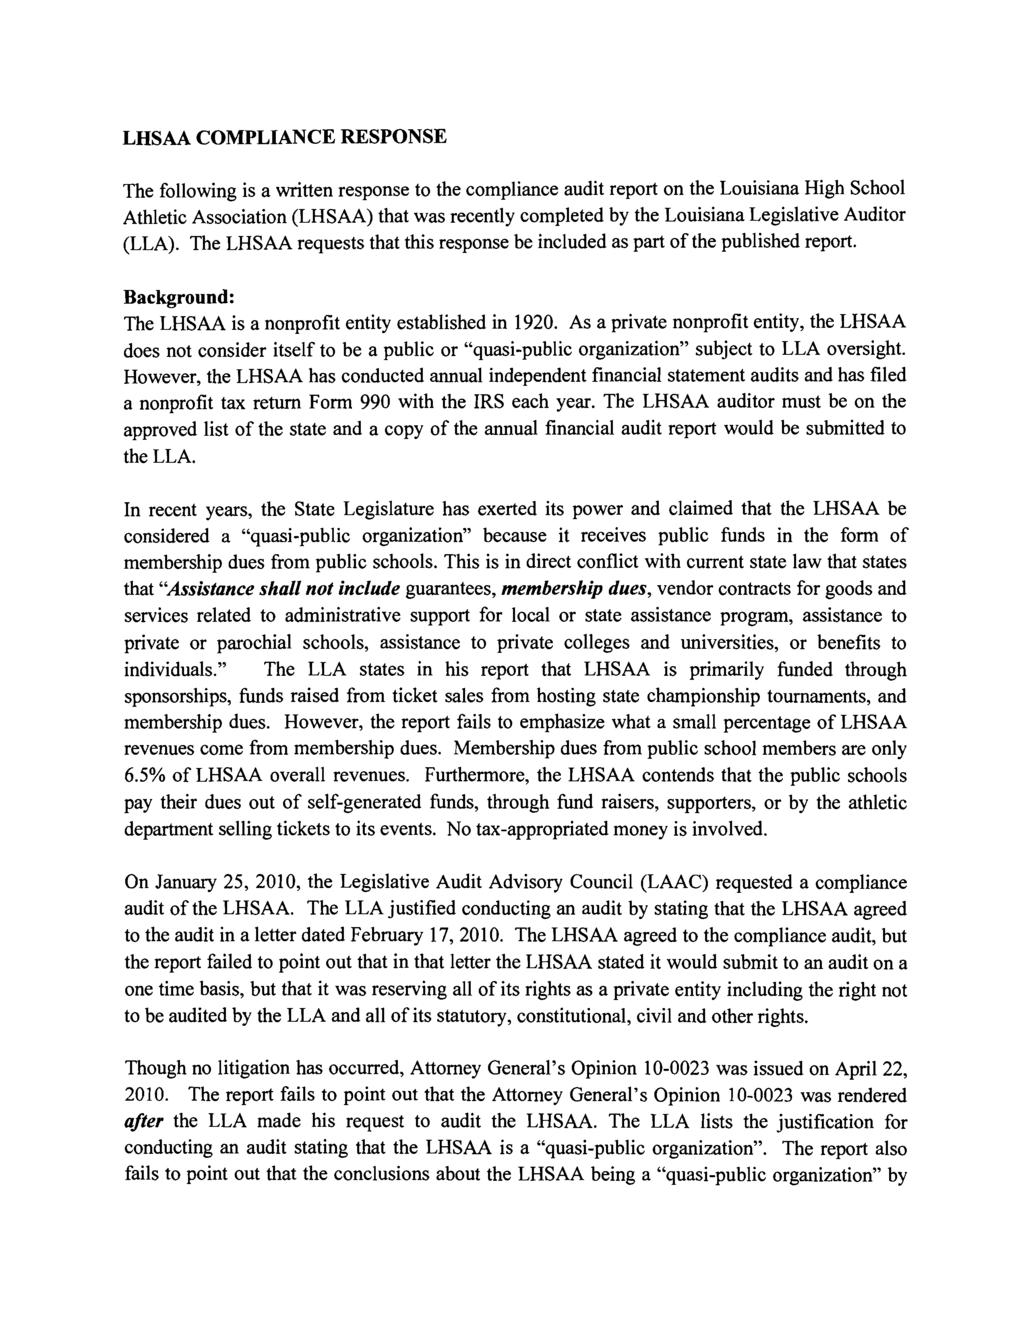 LHSAA COMPLIANCE RESPONSE The following is a written response to the compliance audit report on the Louisiana High School Athletic Association (LHSAA) that was recently completed by the Louisiana